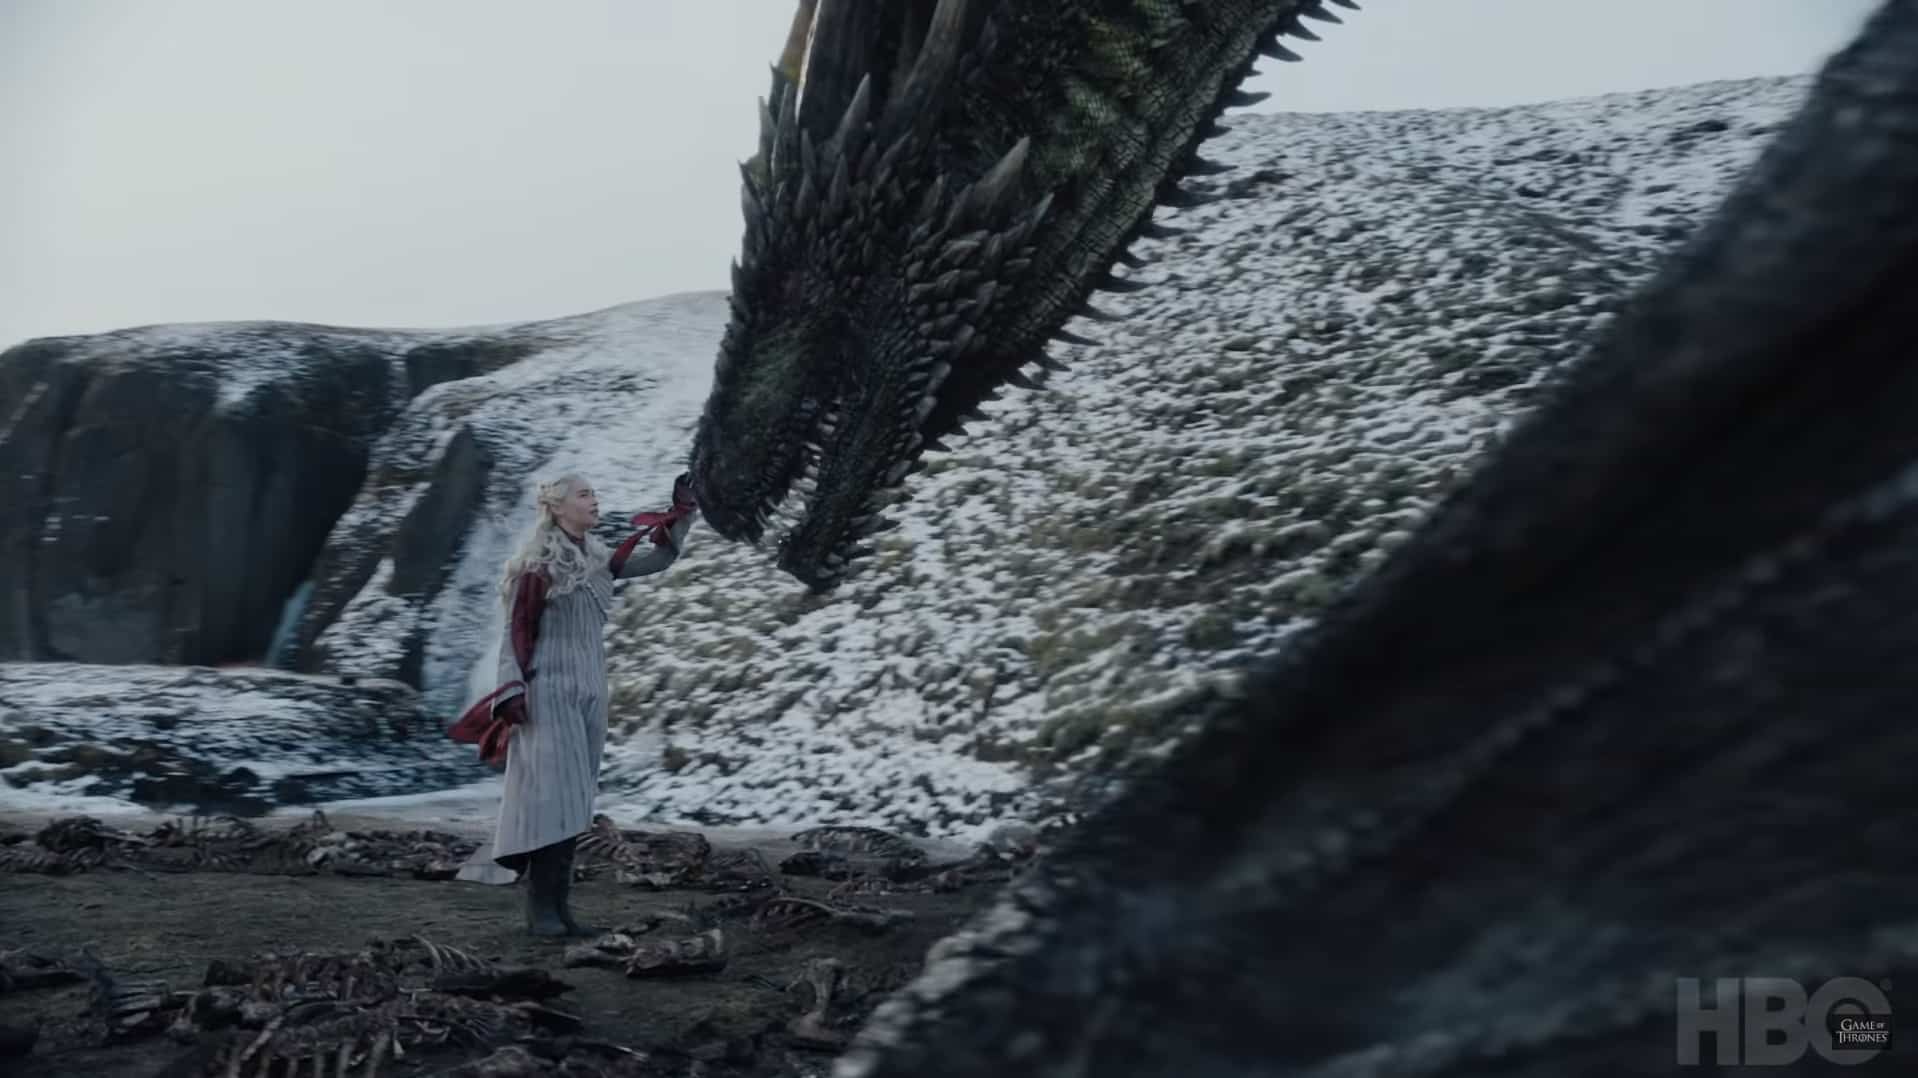 Game of Thrones Season 8 Episode 4 Trailer is Released